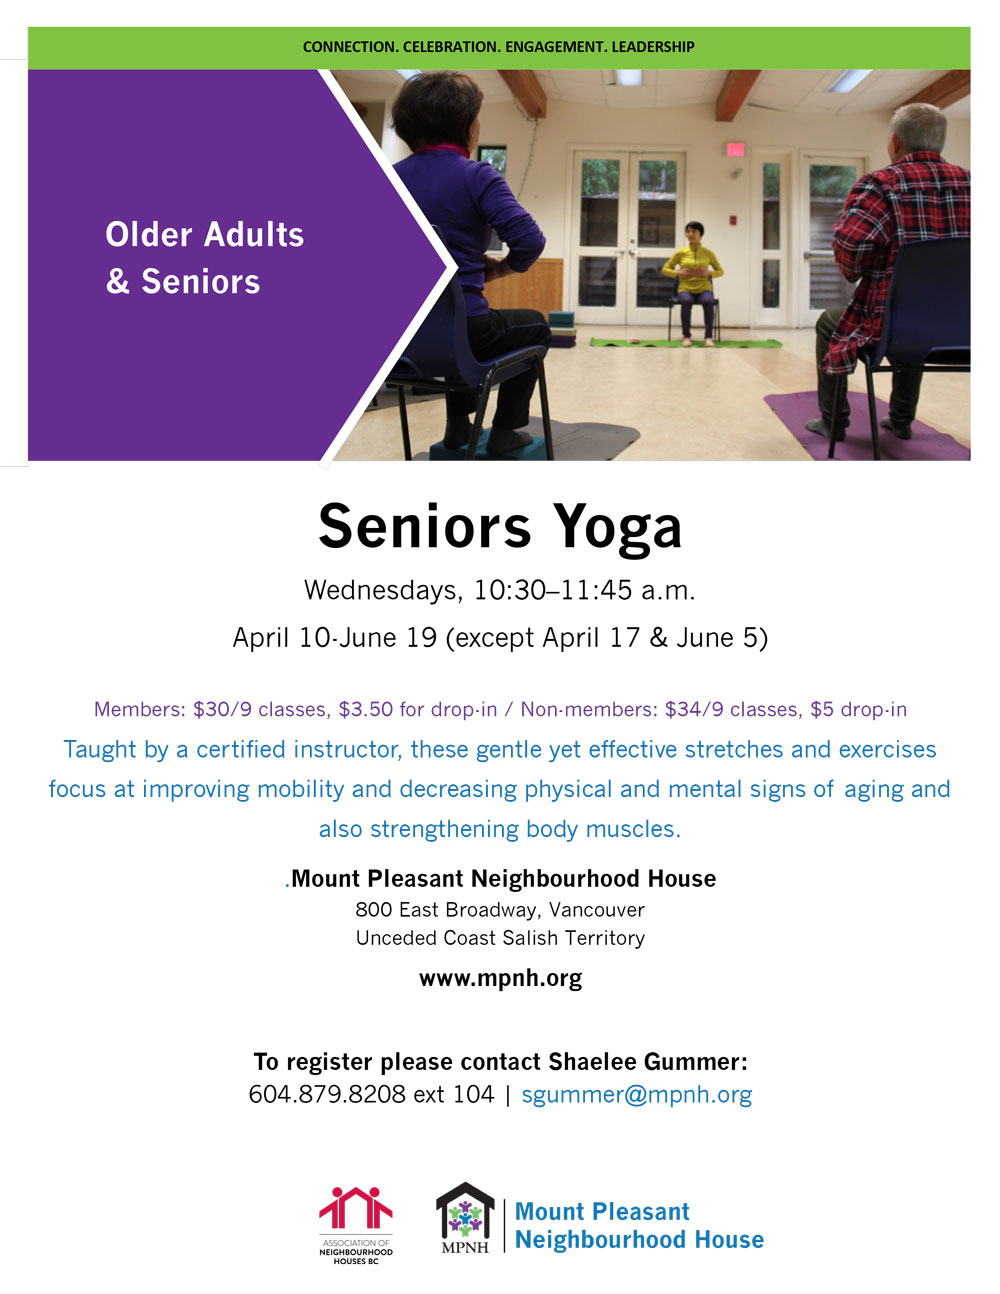 A poster showing seniors doing yoga while seated on chairs.